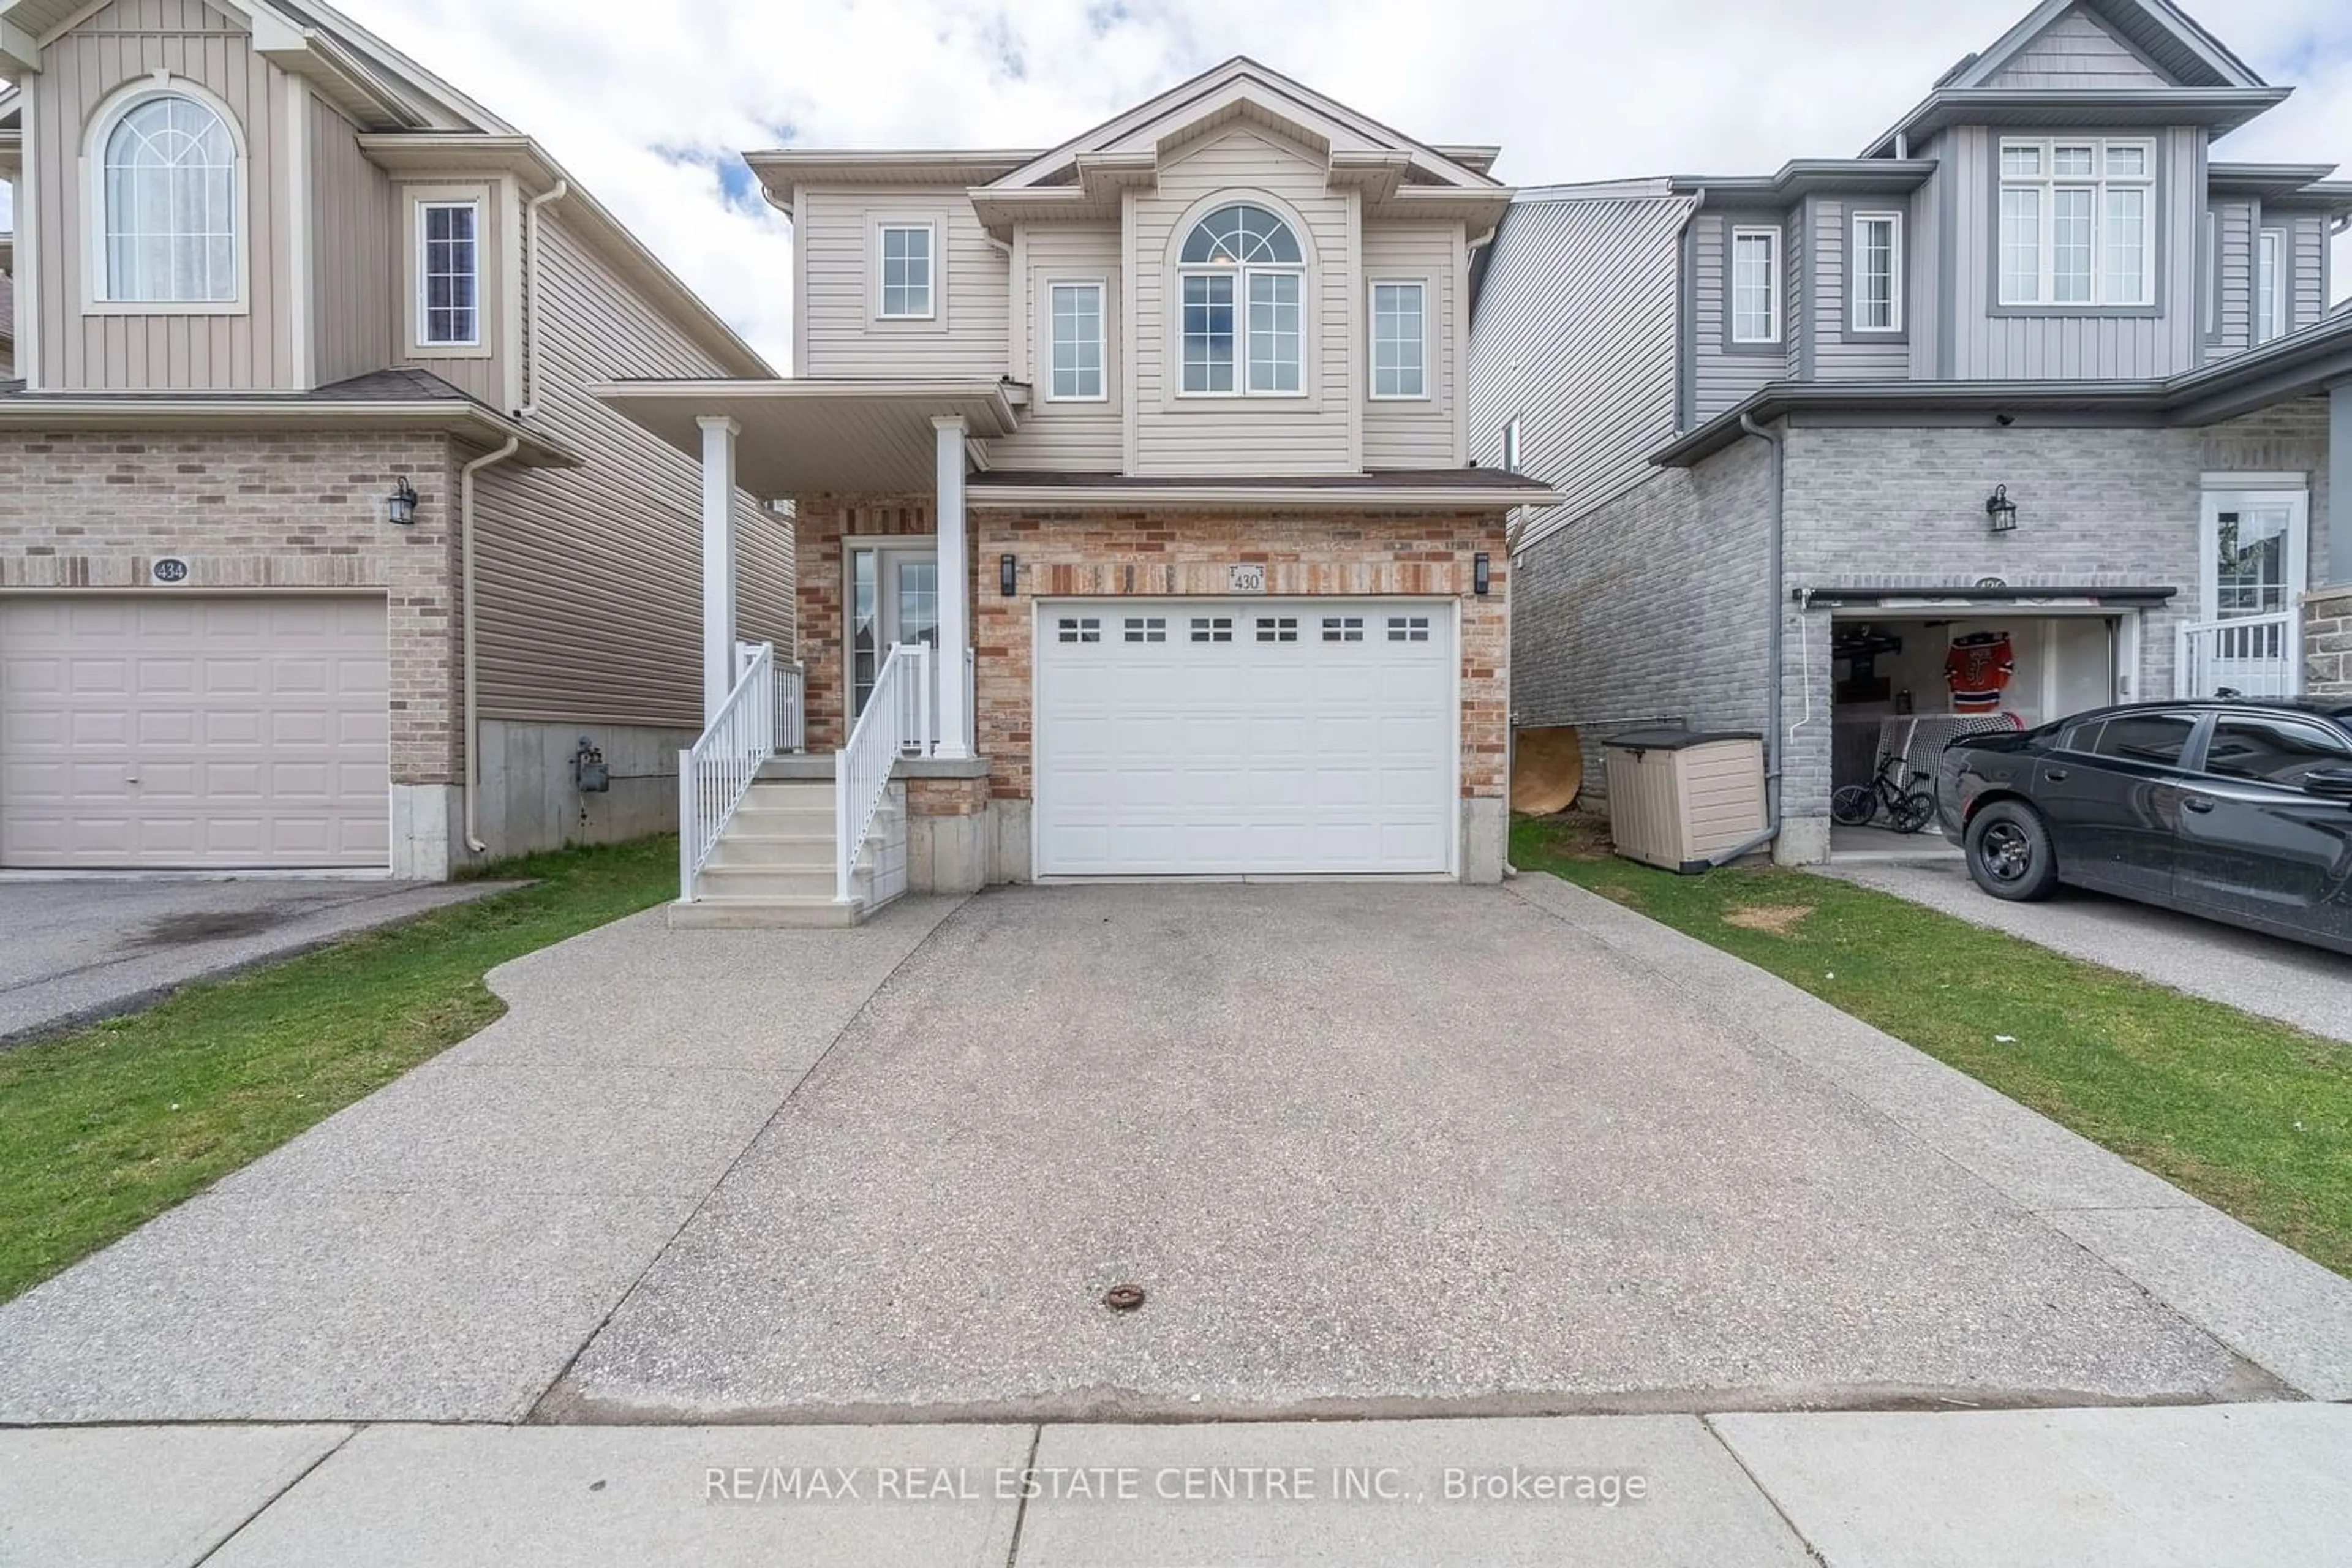 Frontside or backside of a home for 430 Woodbine Ave Ave, Kitchener Ontario N2R 0A6